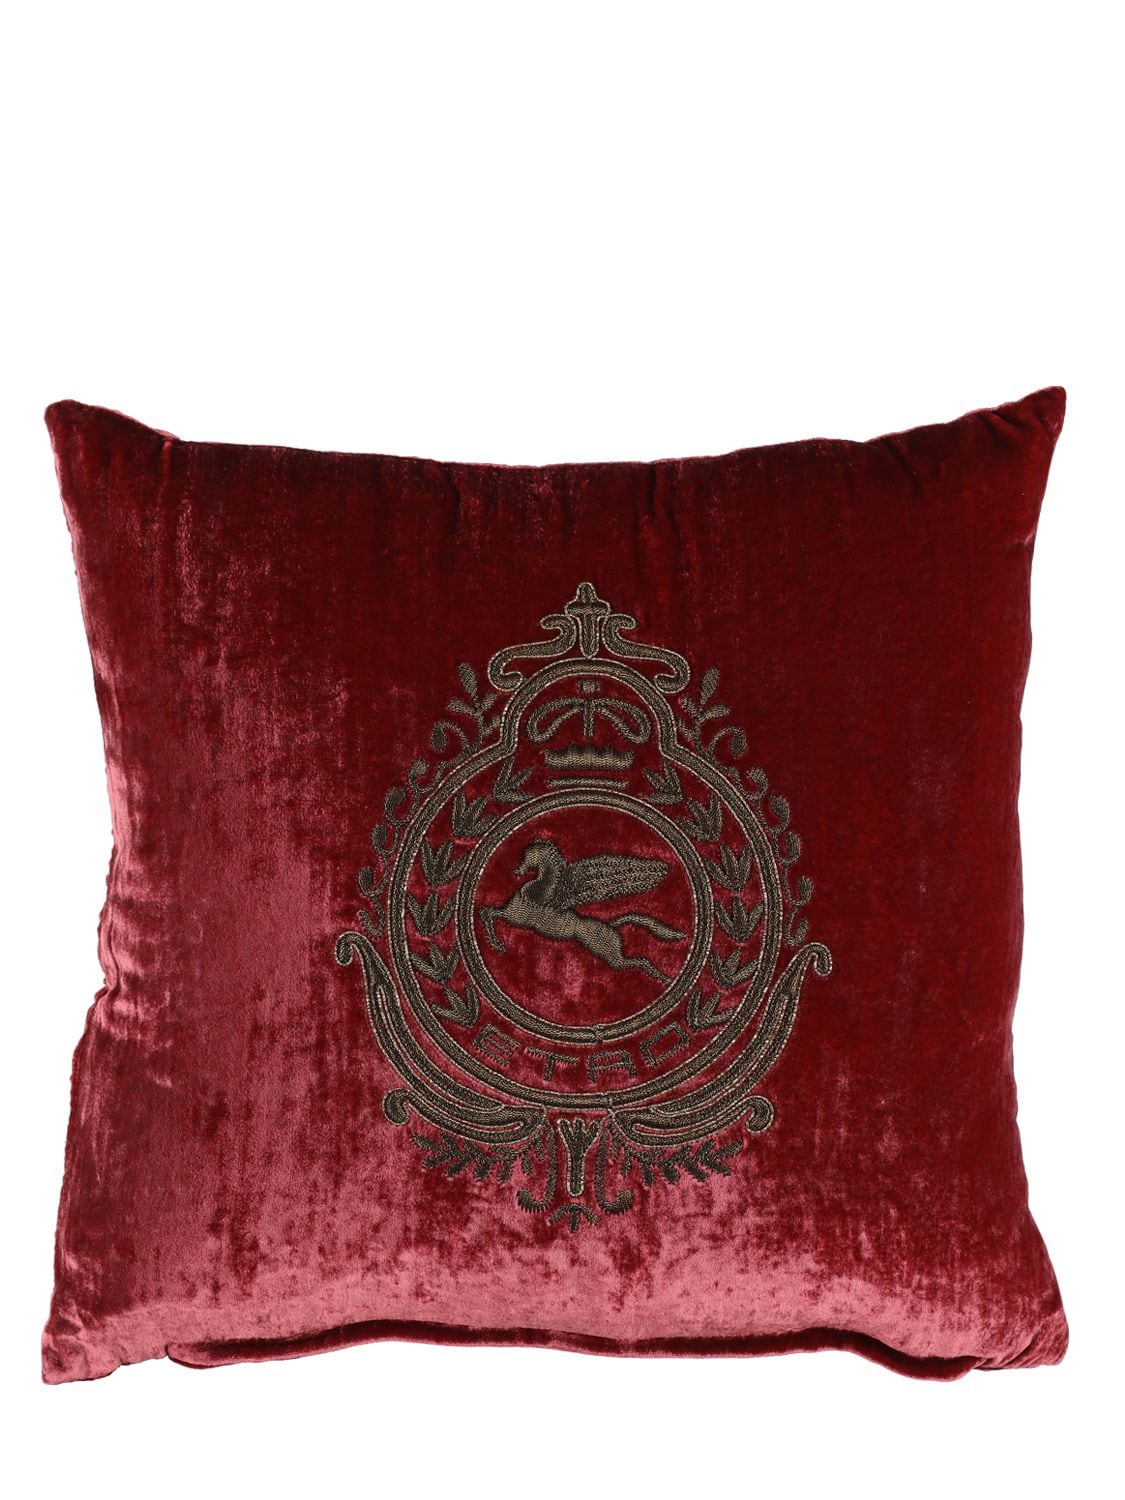 Etro Crest Embroidered Cushion In Red